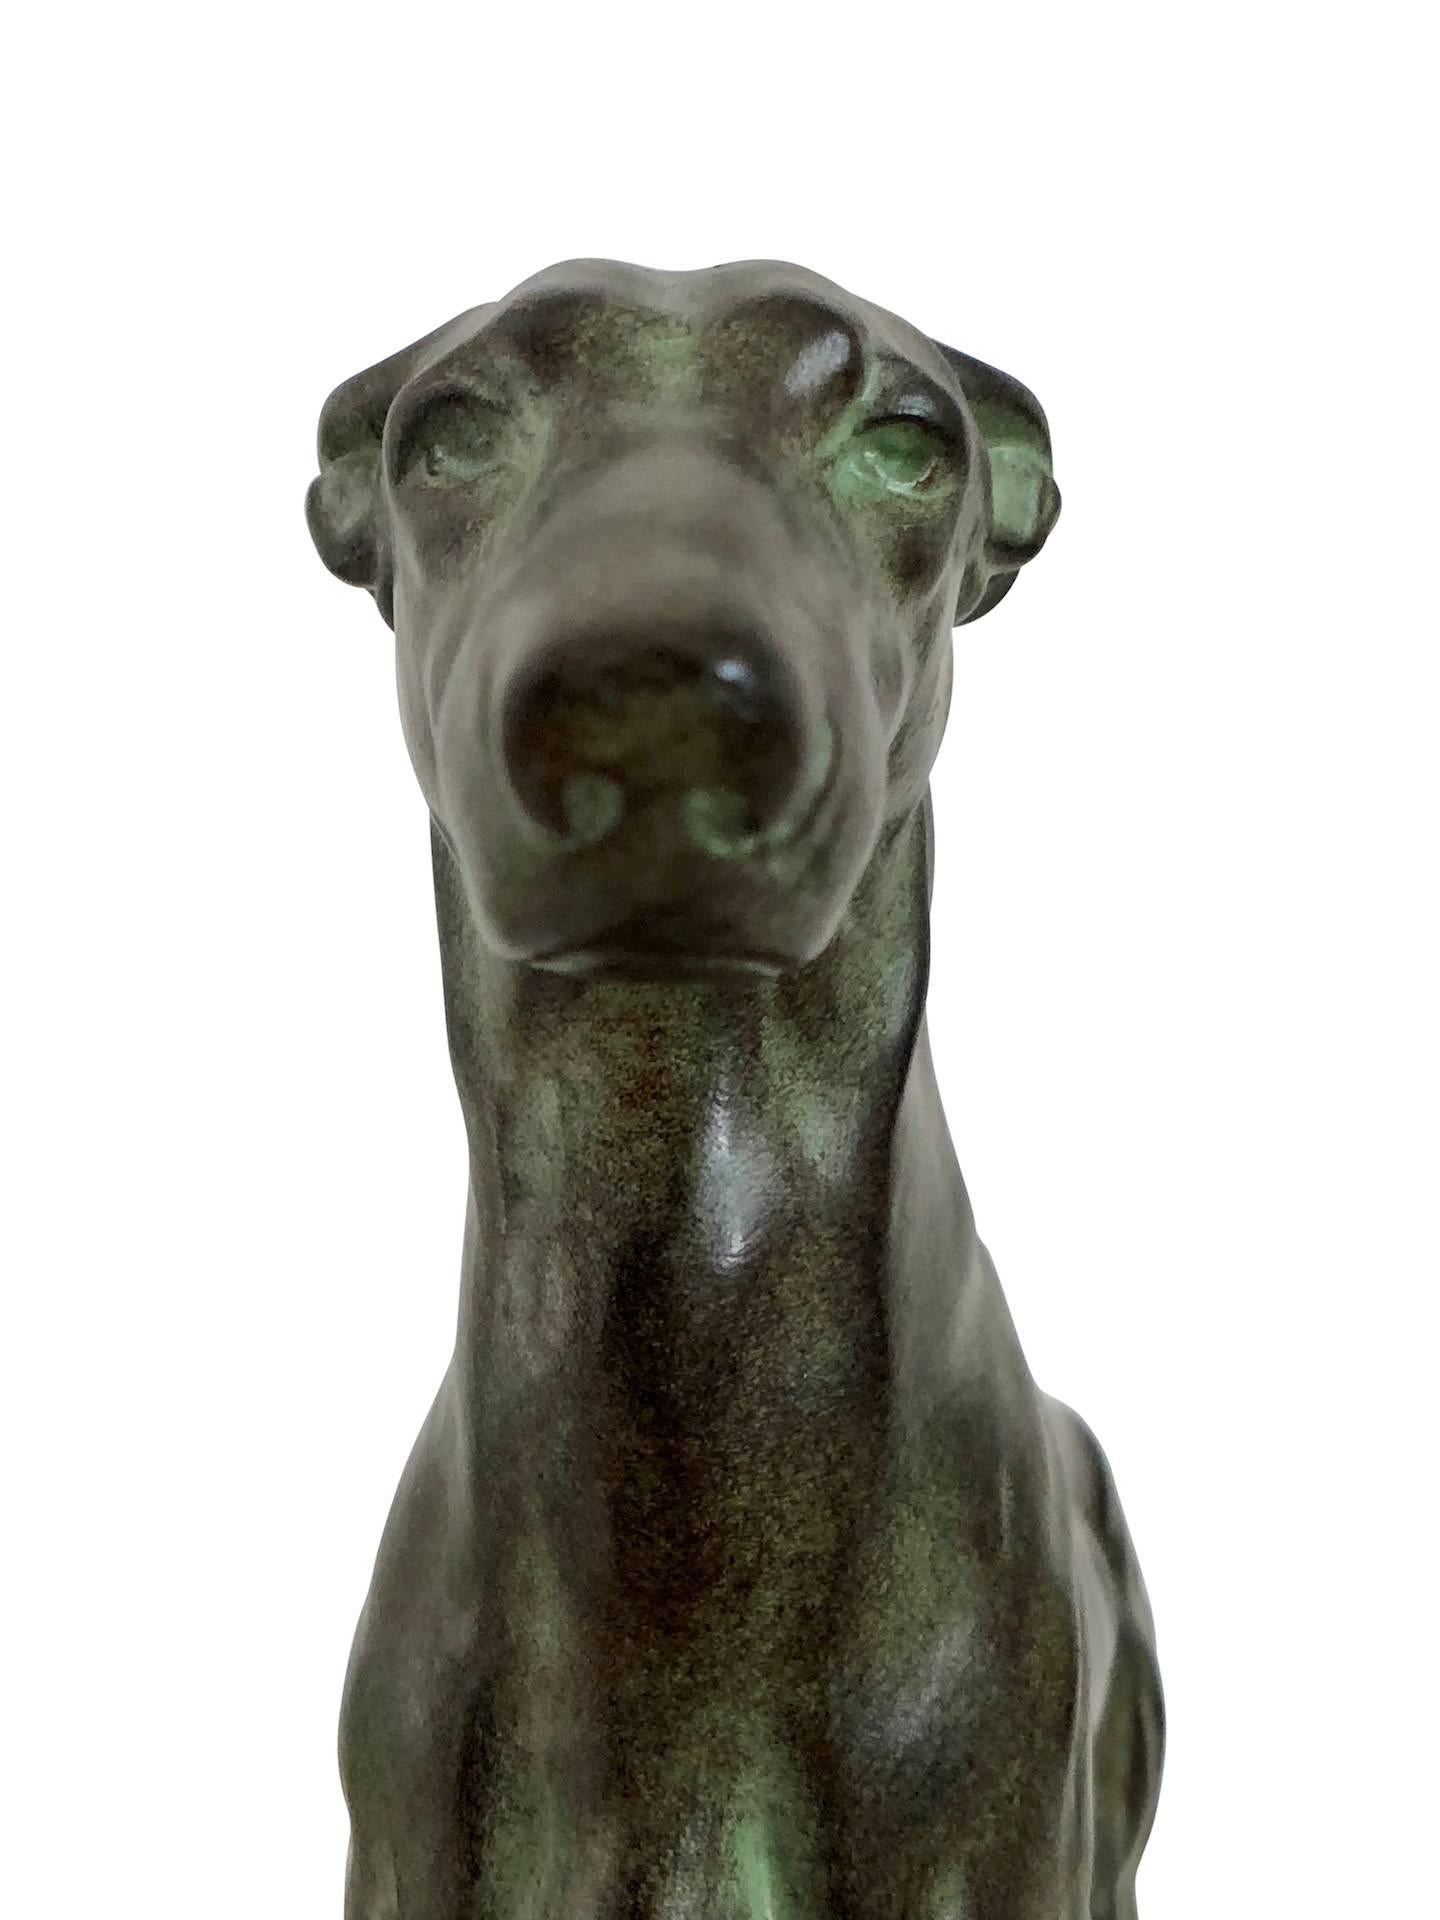 Art Deco Greyhound Dog Sculpture Sloughi by Jules Edmond Masson for Max Le Verrier